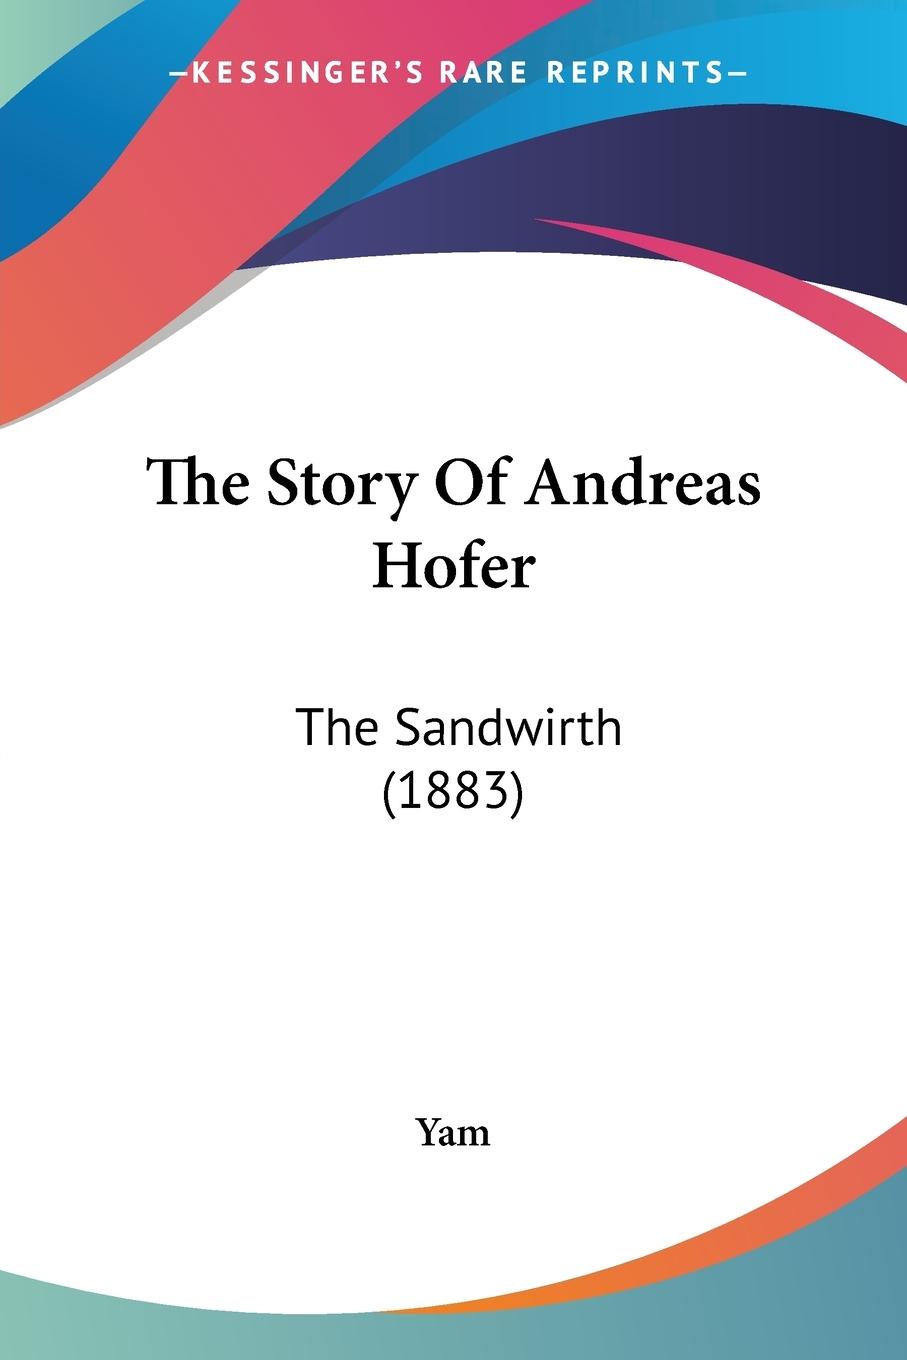 The Story Of Andreas Hofer - Yam